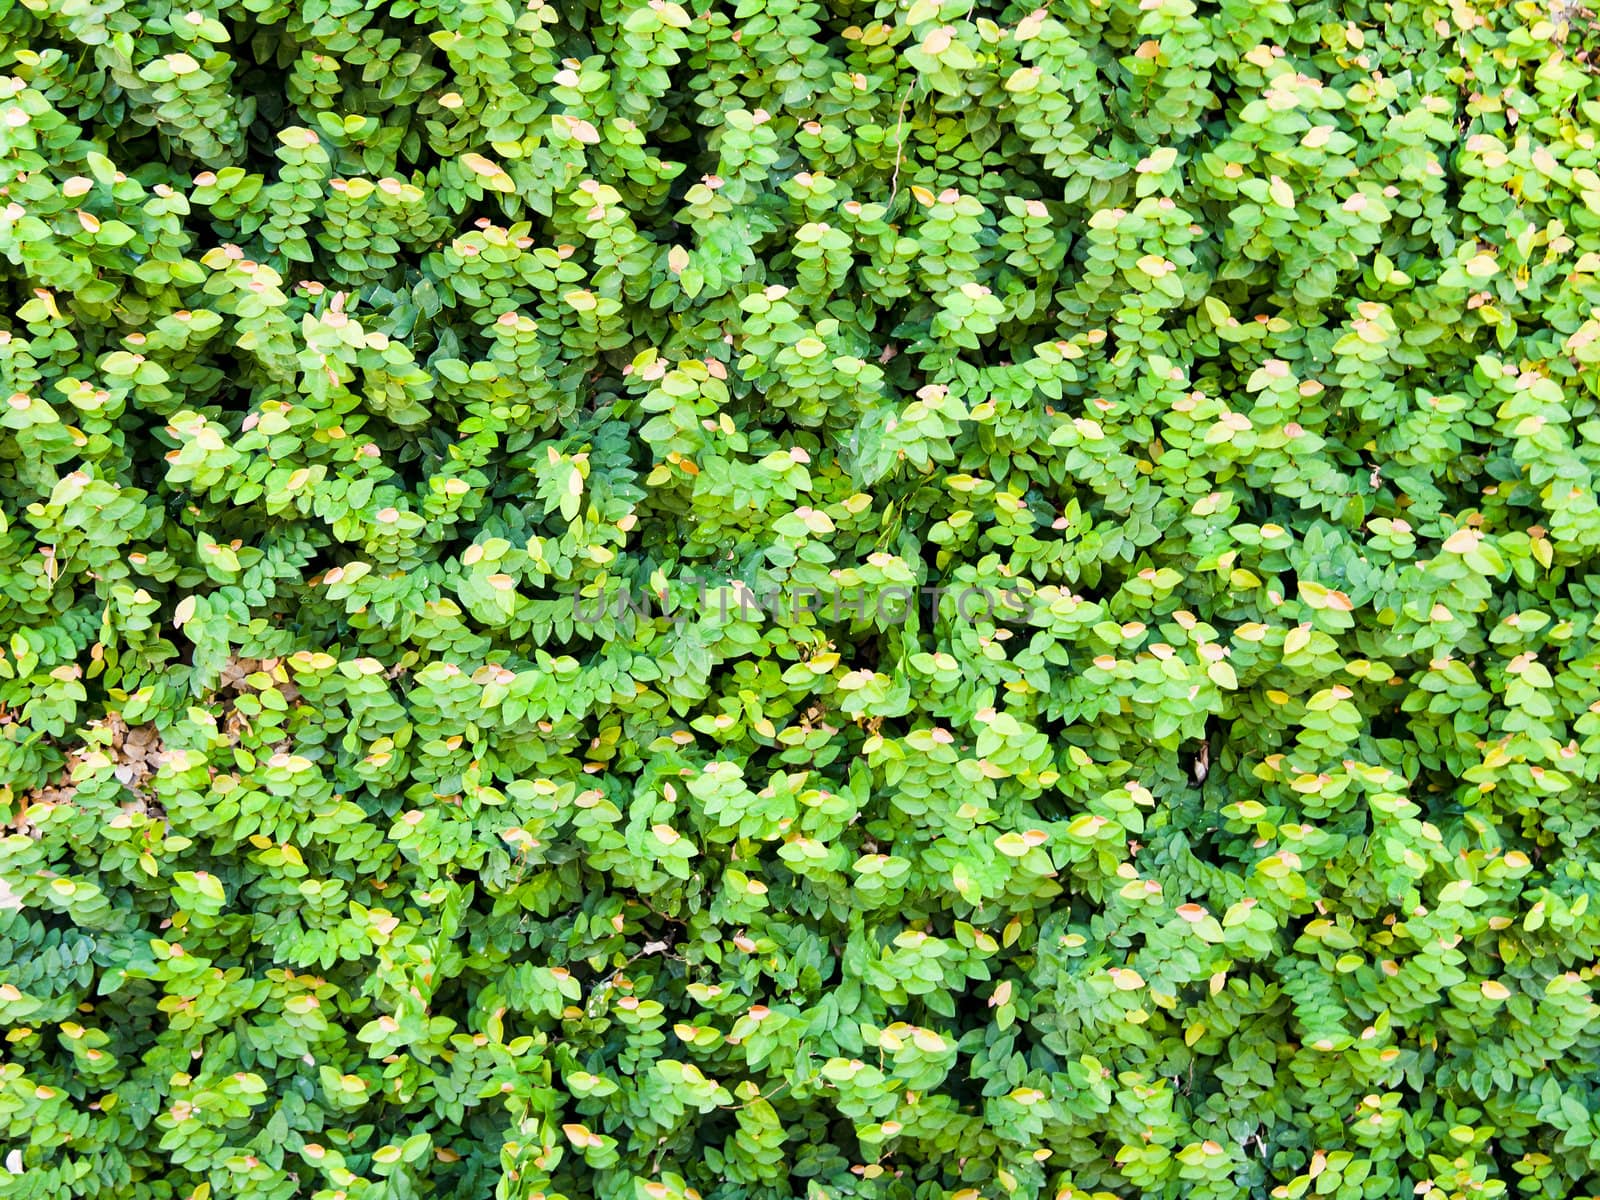 Green wall of Ivy leaves, nature background, texture by jakgree